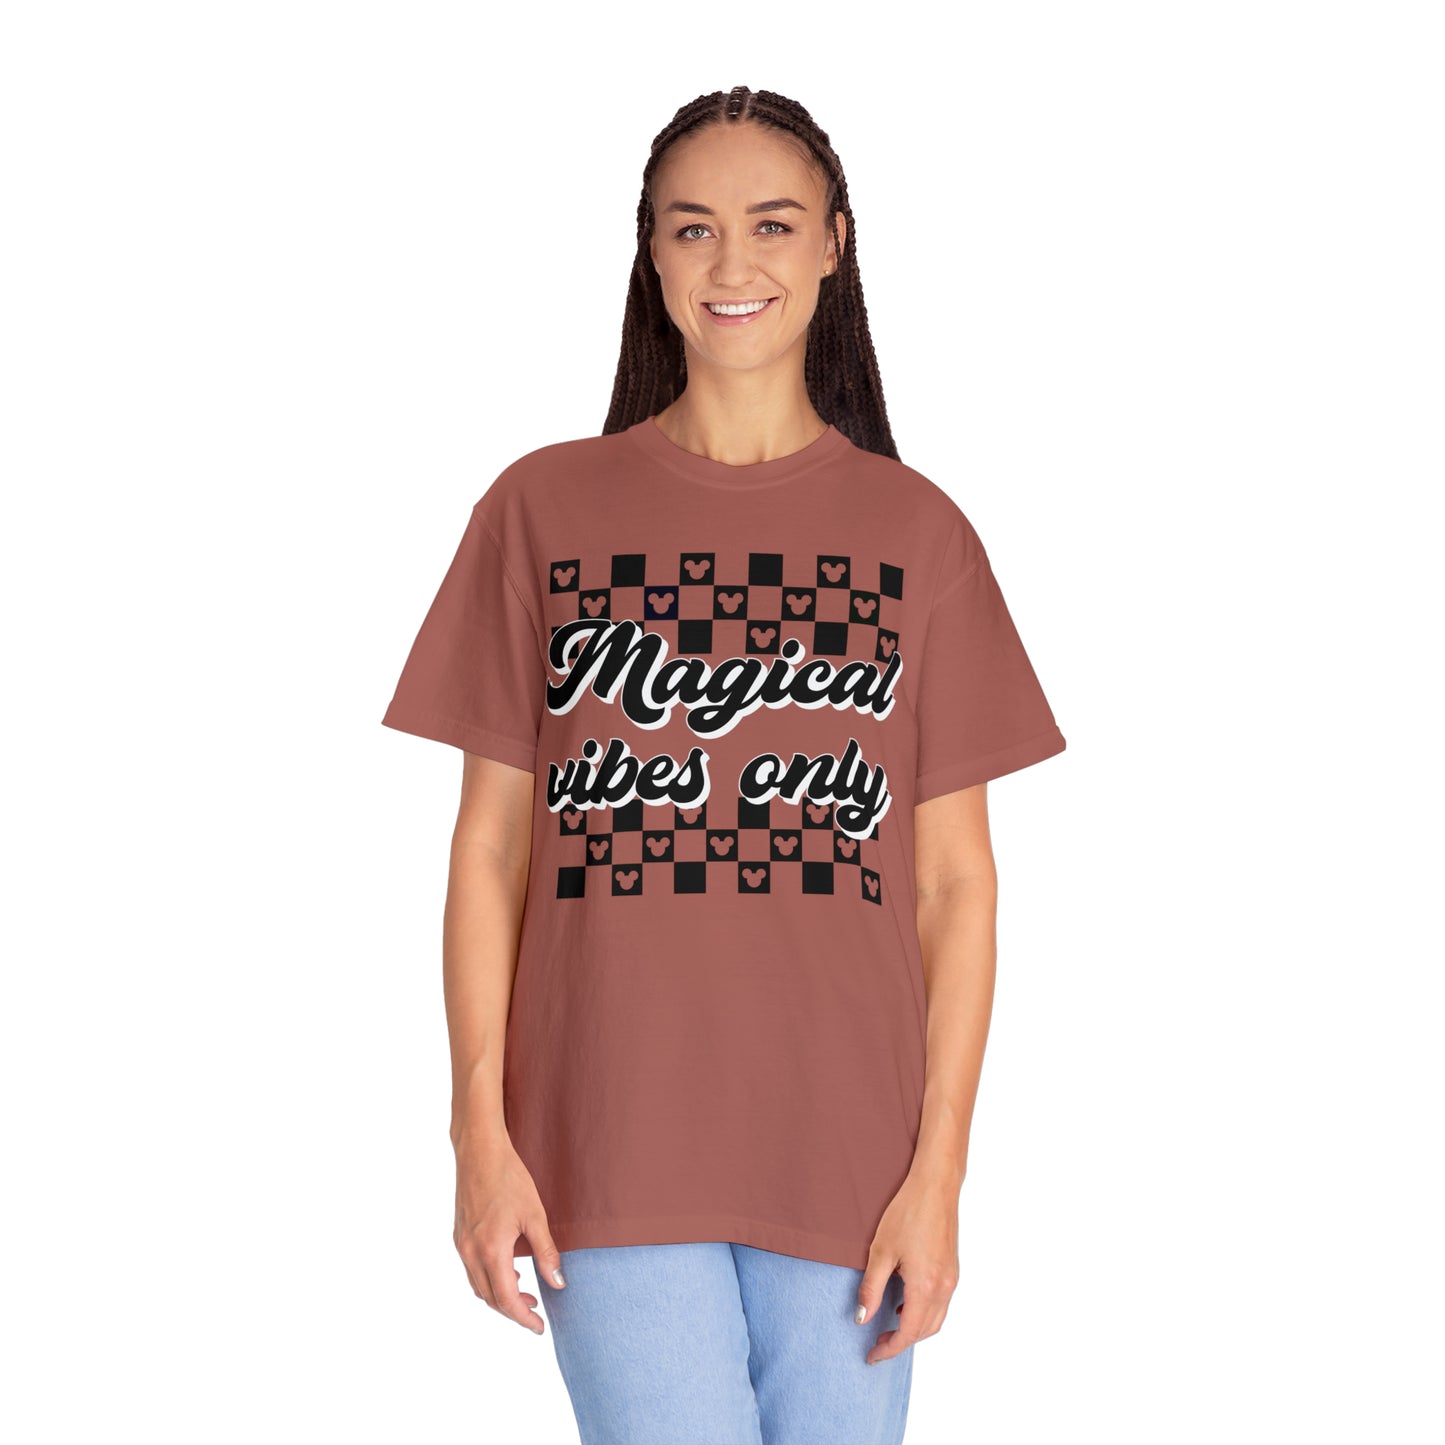 Adult Magical Vibes Only Tee - Comfort Colors